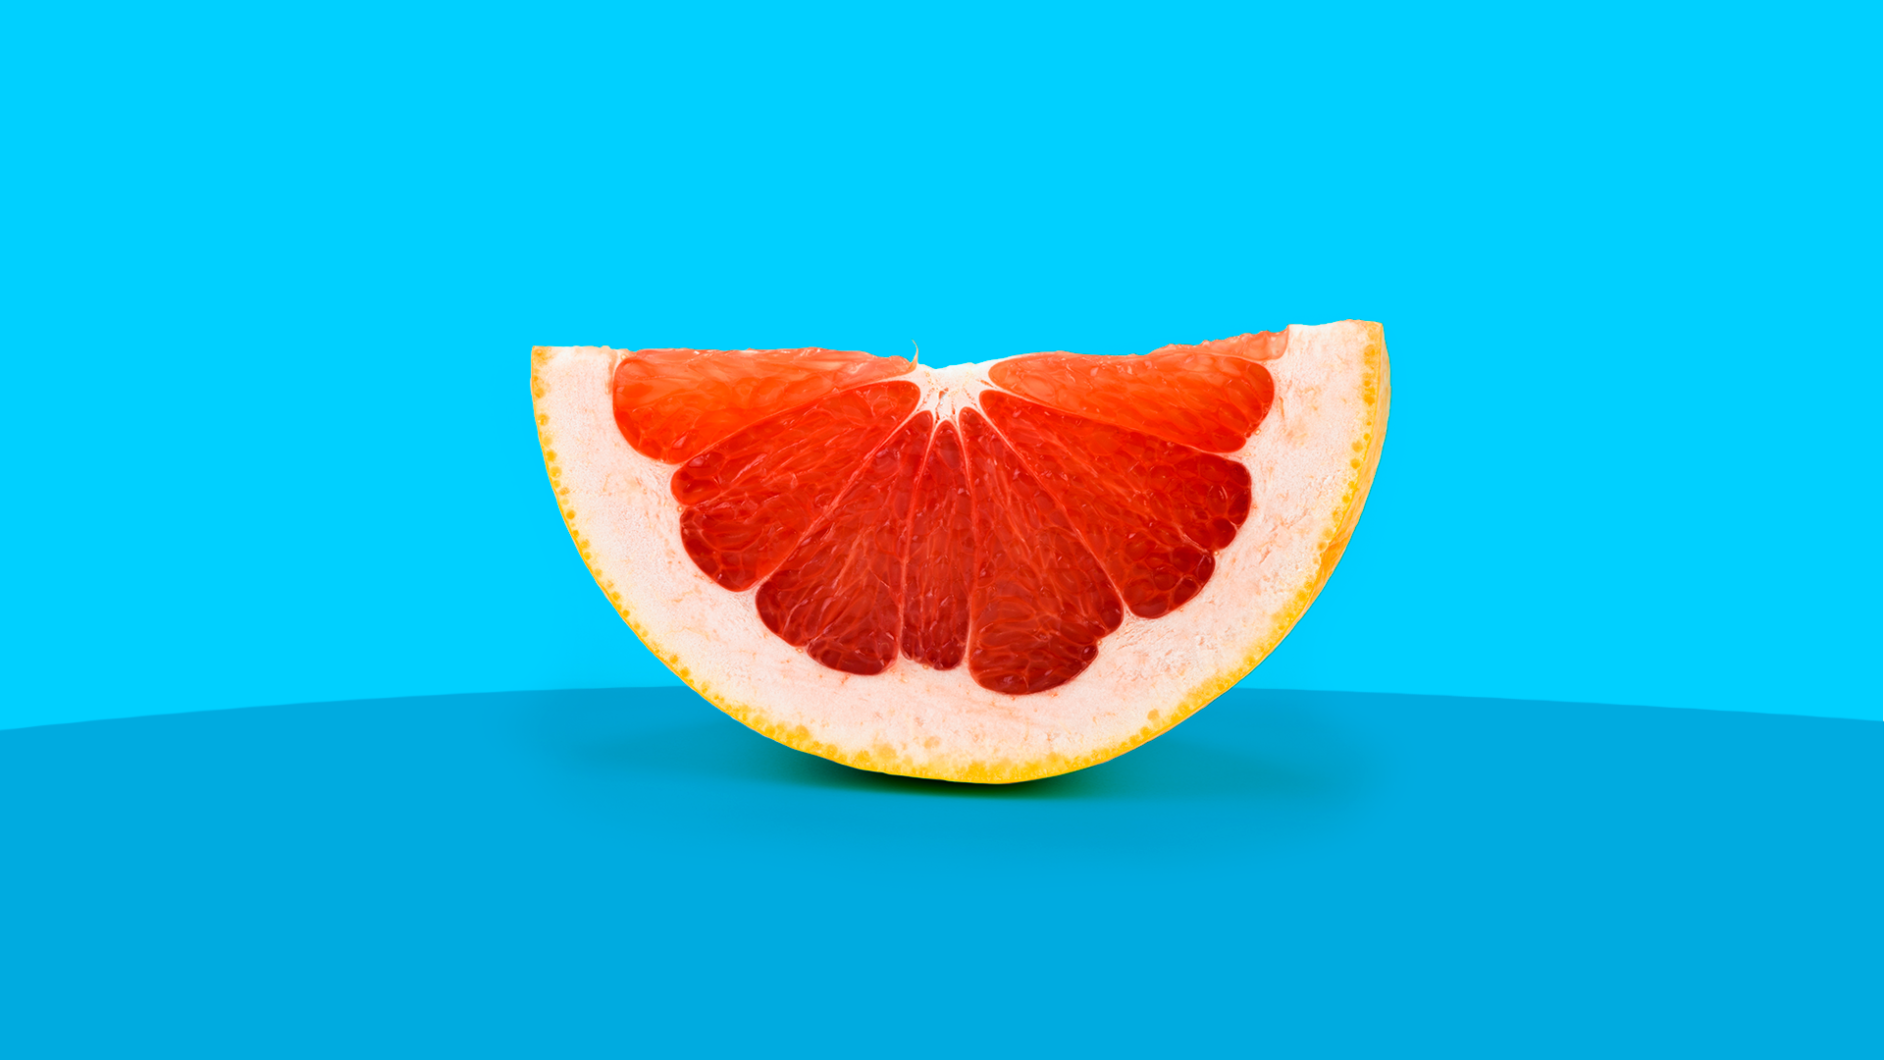 Grapefruit section - food medication interactions